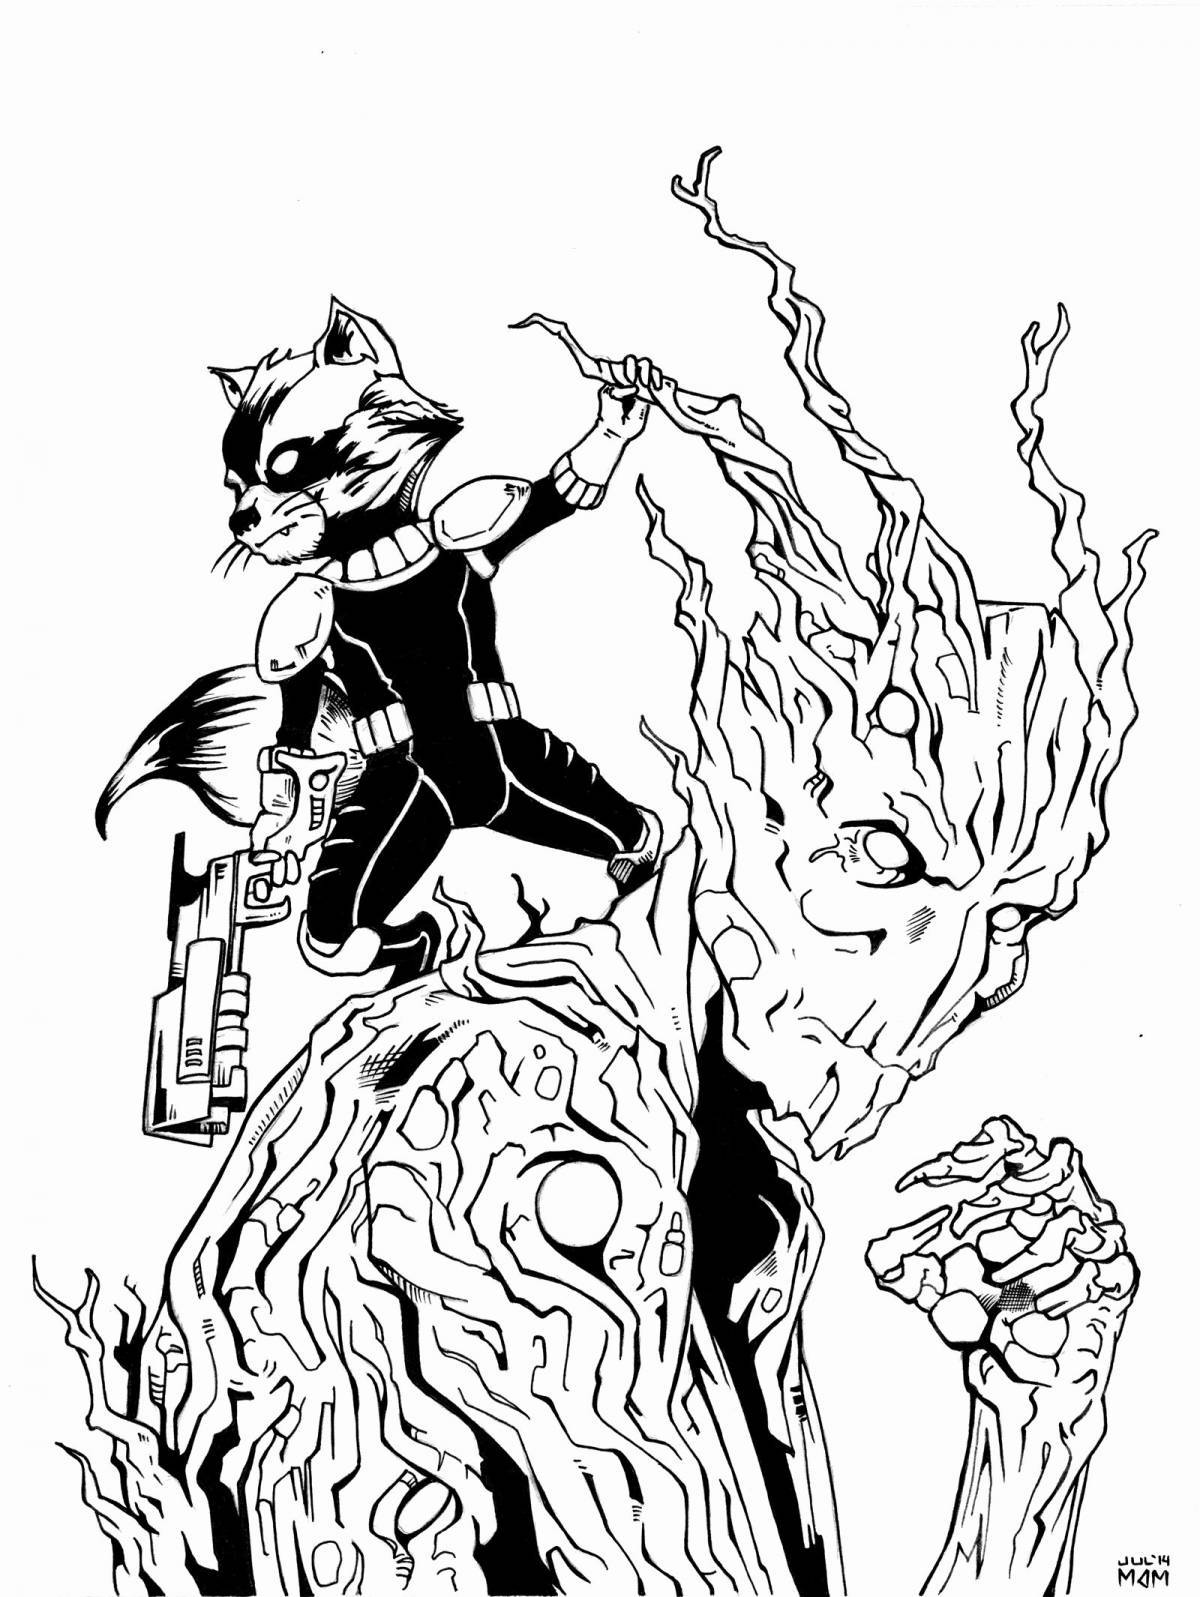 Charming groot coloring book